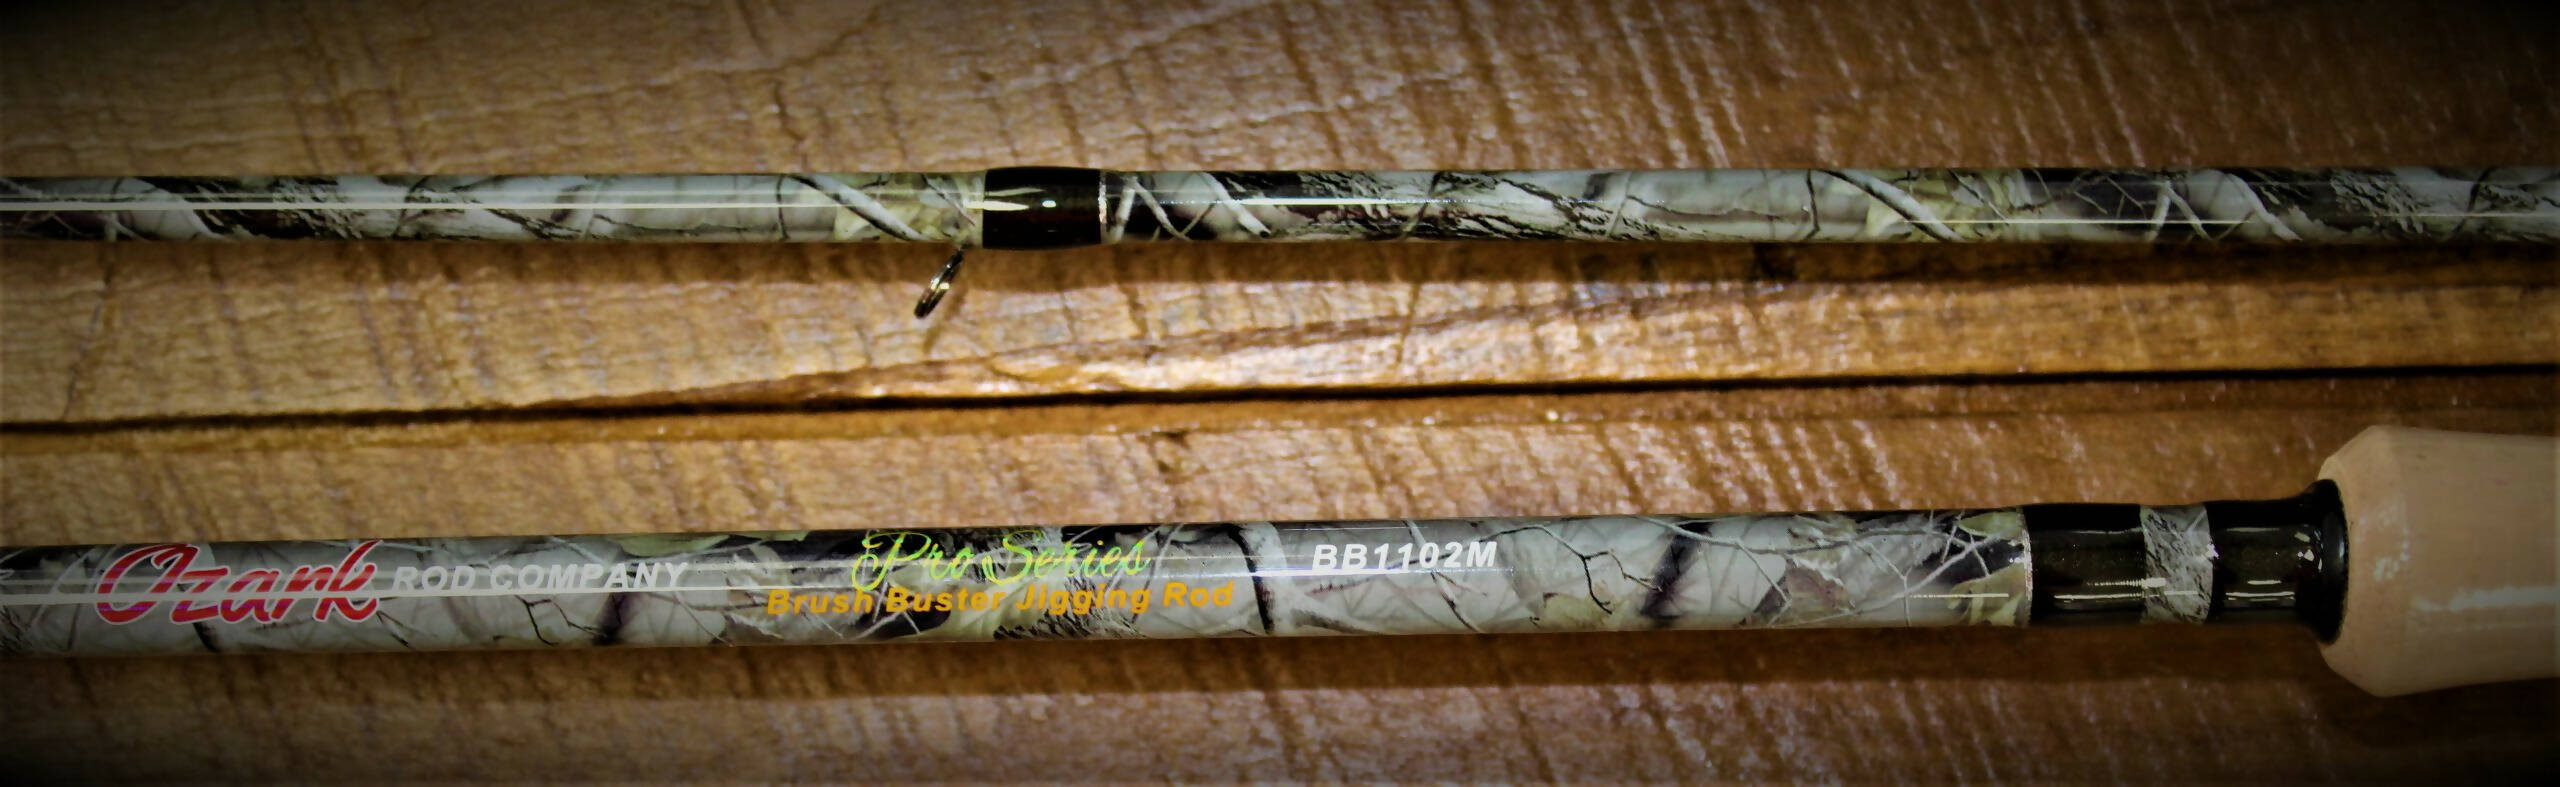 Ozark Rods-Brush Buster Camo Jigging Rod-10ft,11ft,12ft,13ft Options! –  American Crappie Gear